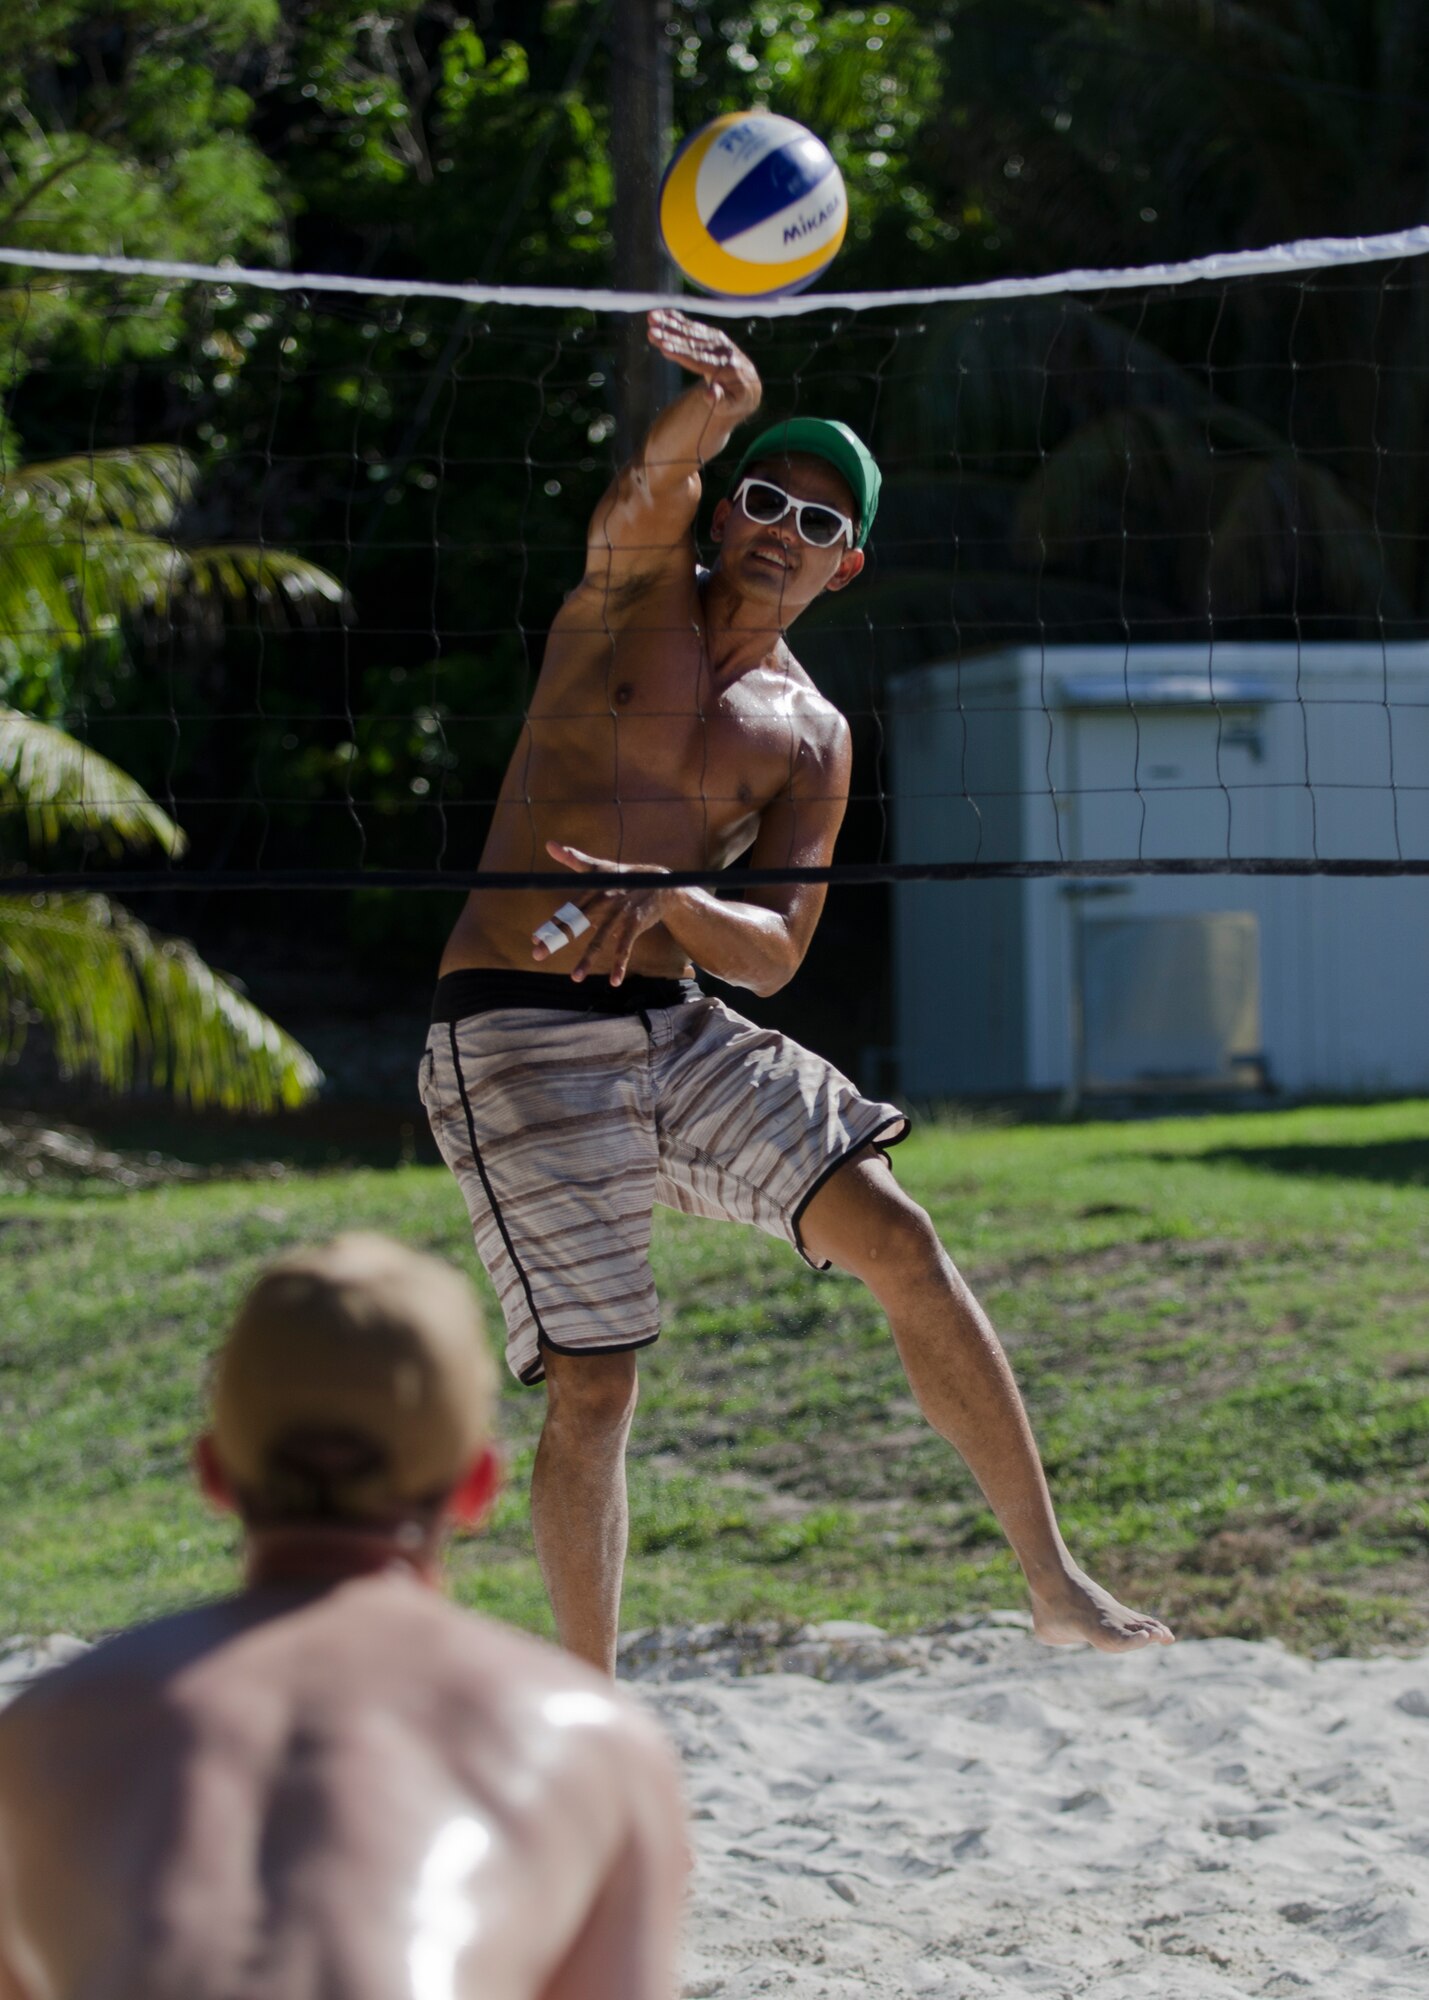 Jimmy Boonprakong, a Guam resident and Tarague Beach Volleyball Tournament participant, spikes a ball during a match June 6, 2014, on Andersen Air Force Base, Guam. More than two dozen players participated in the 36th Force Support Squadron-hosted tournament. (U.S. Air Force photo by Senior Airman Katrina M. Brisbin/Released)